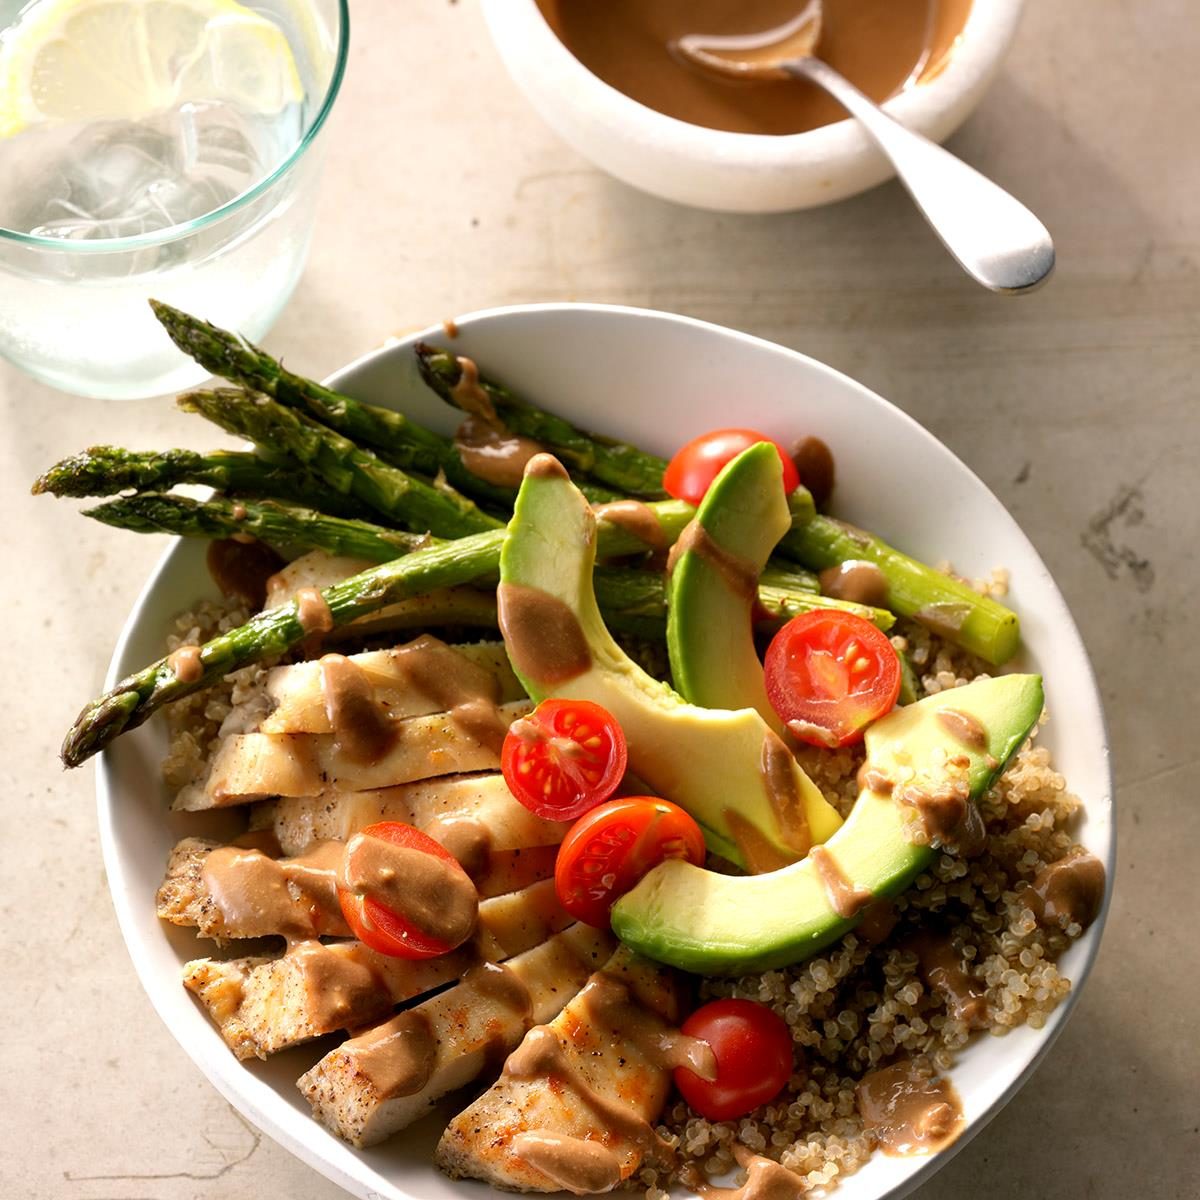 Day 30: Chicken Quinoa Bowls with Balsamic Dressing